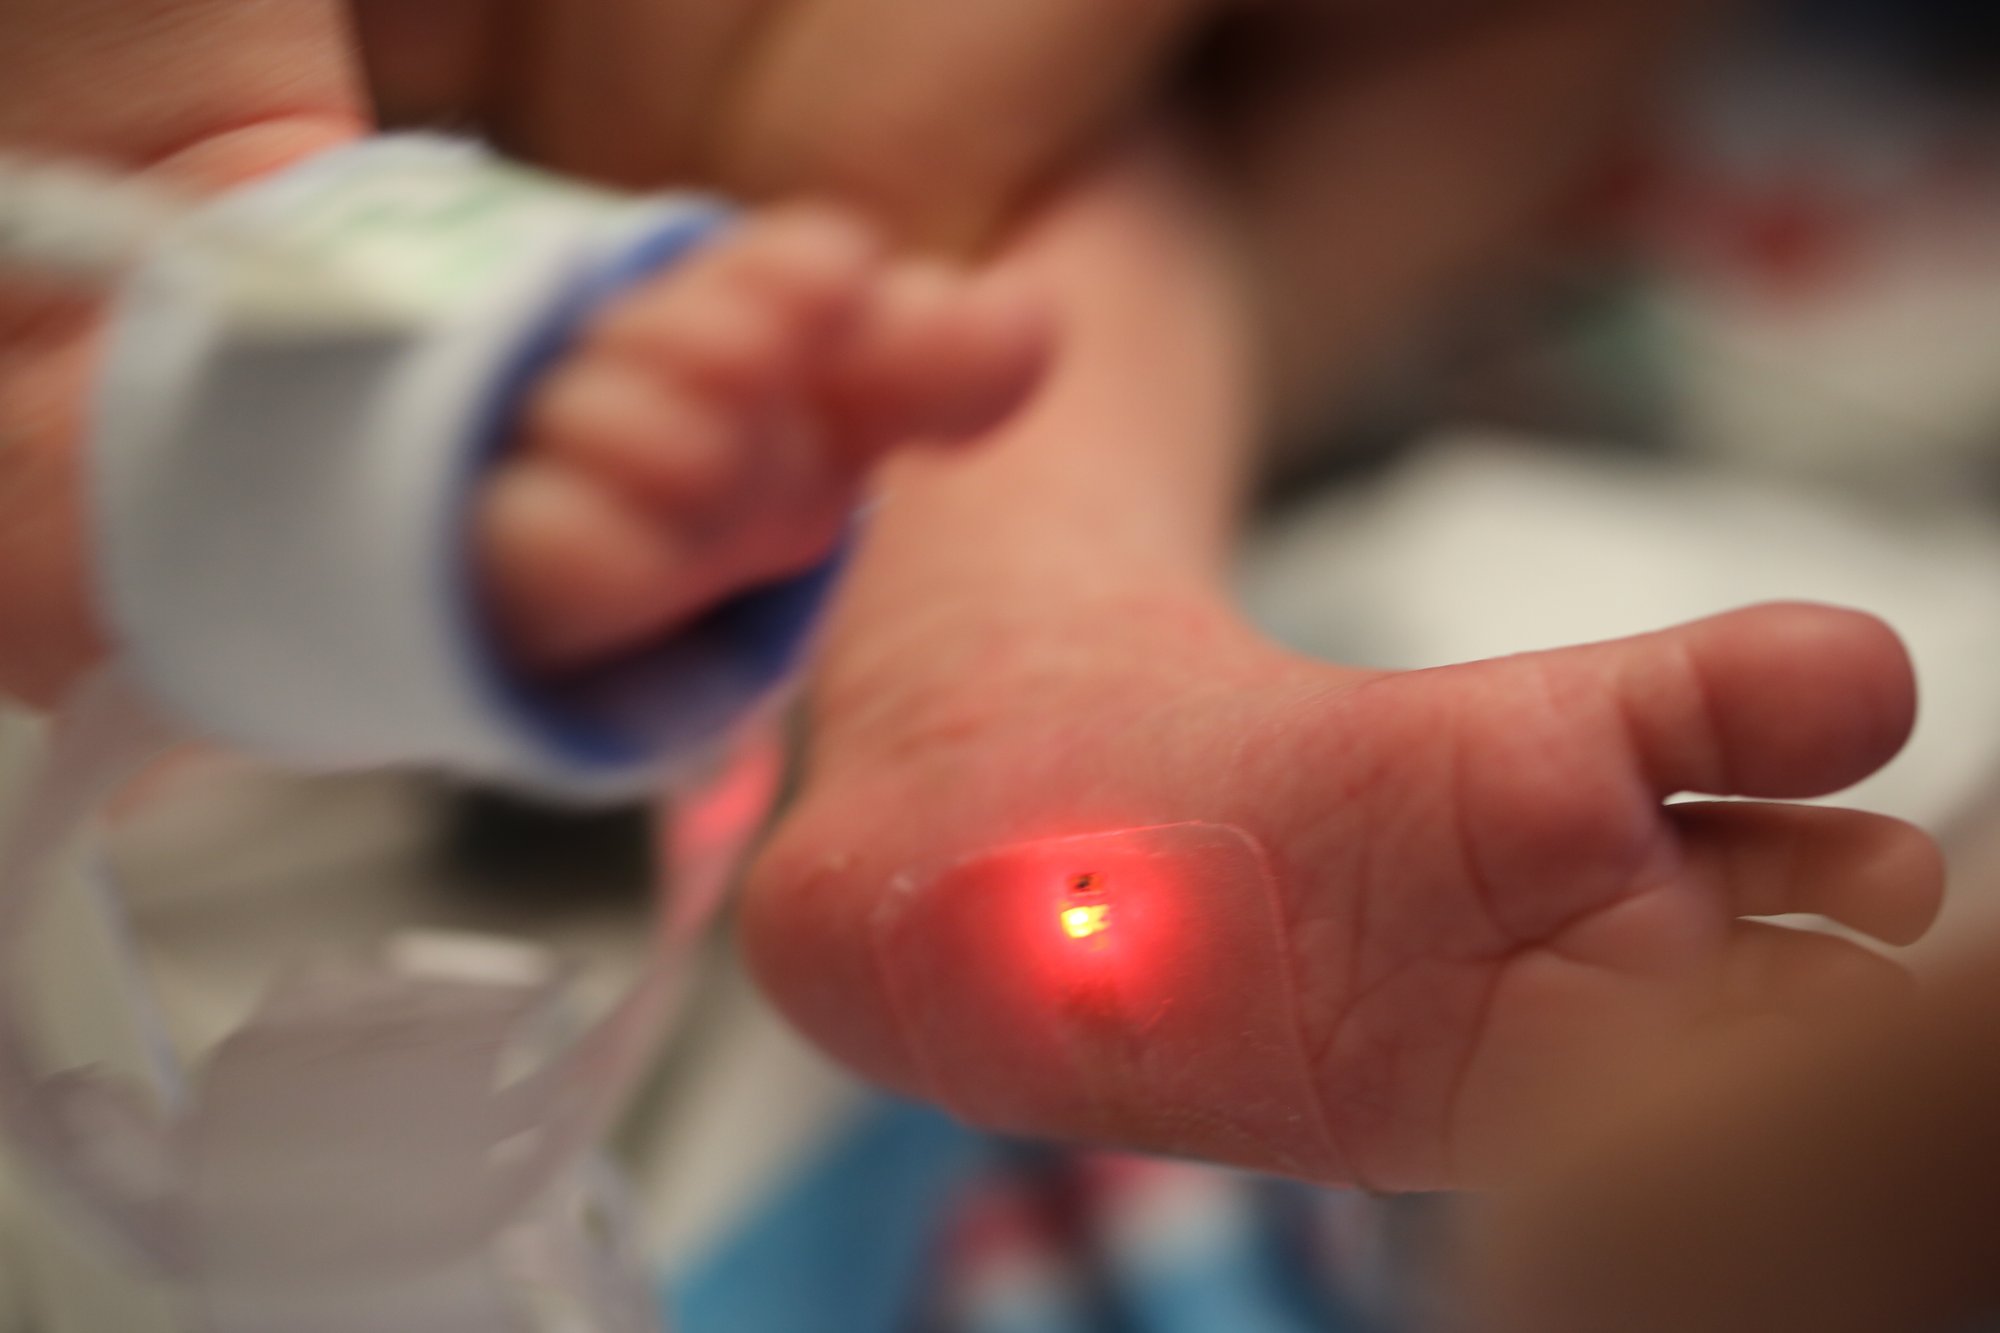 This 2019 photo provided by Northwestern University shows a soft, flexible wireless sensor applied on a foot of a family's baby, who is involved in the clinical trial at Ann & Robert H. Lurie Children's Hospital of Chicago. This kind of sensor could replace the tangle of wire-based sensors that currently monitor babies in hospitals' neonatal intensive care units. (Northwestern University via AP)